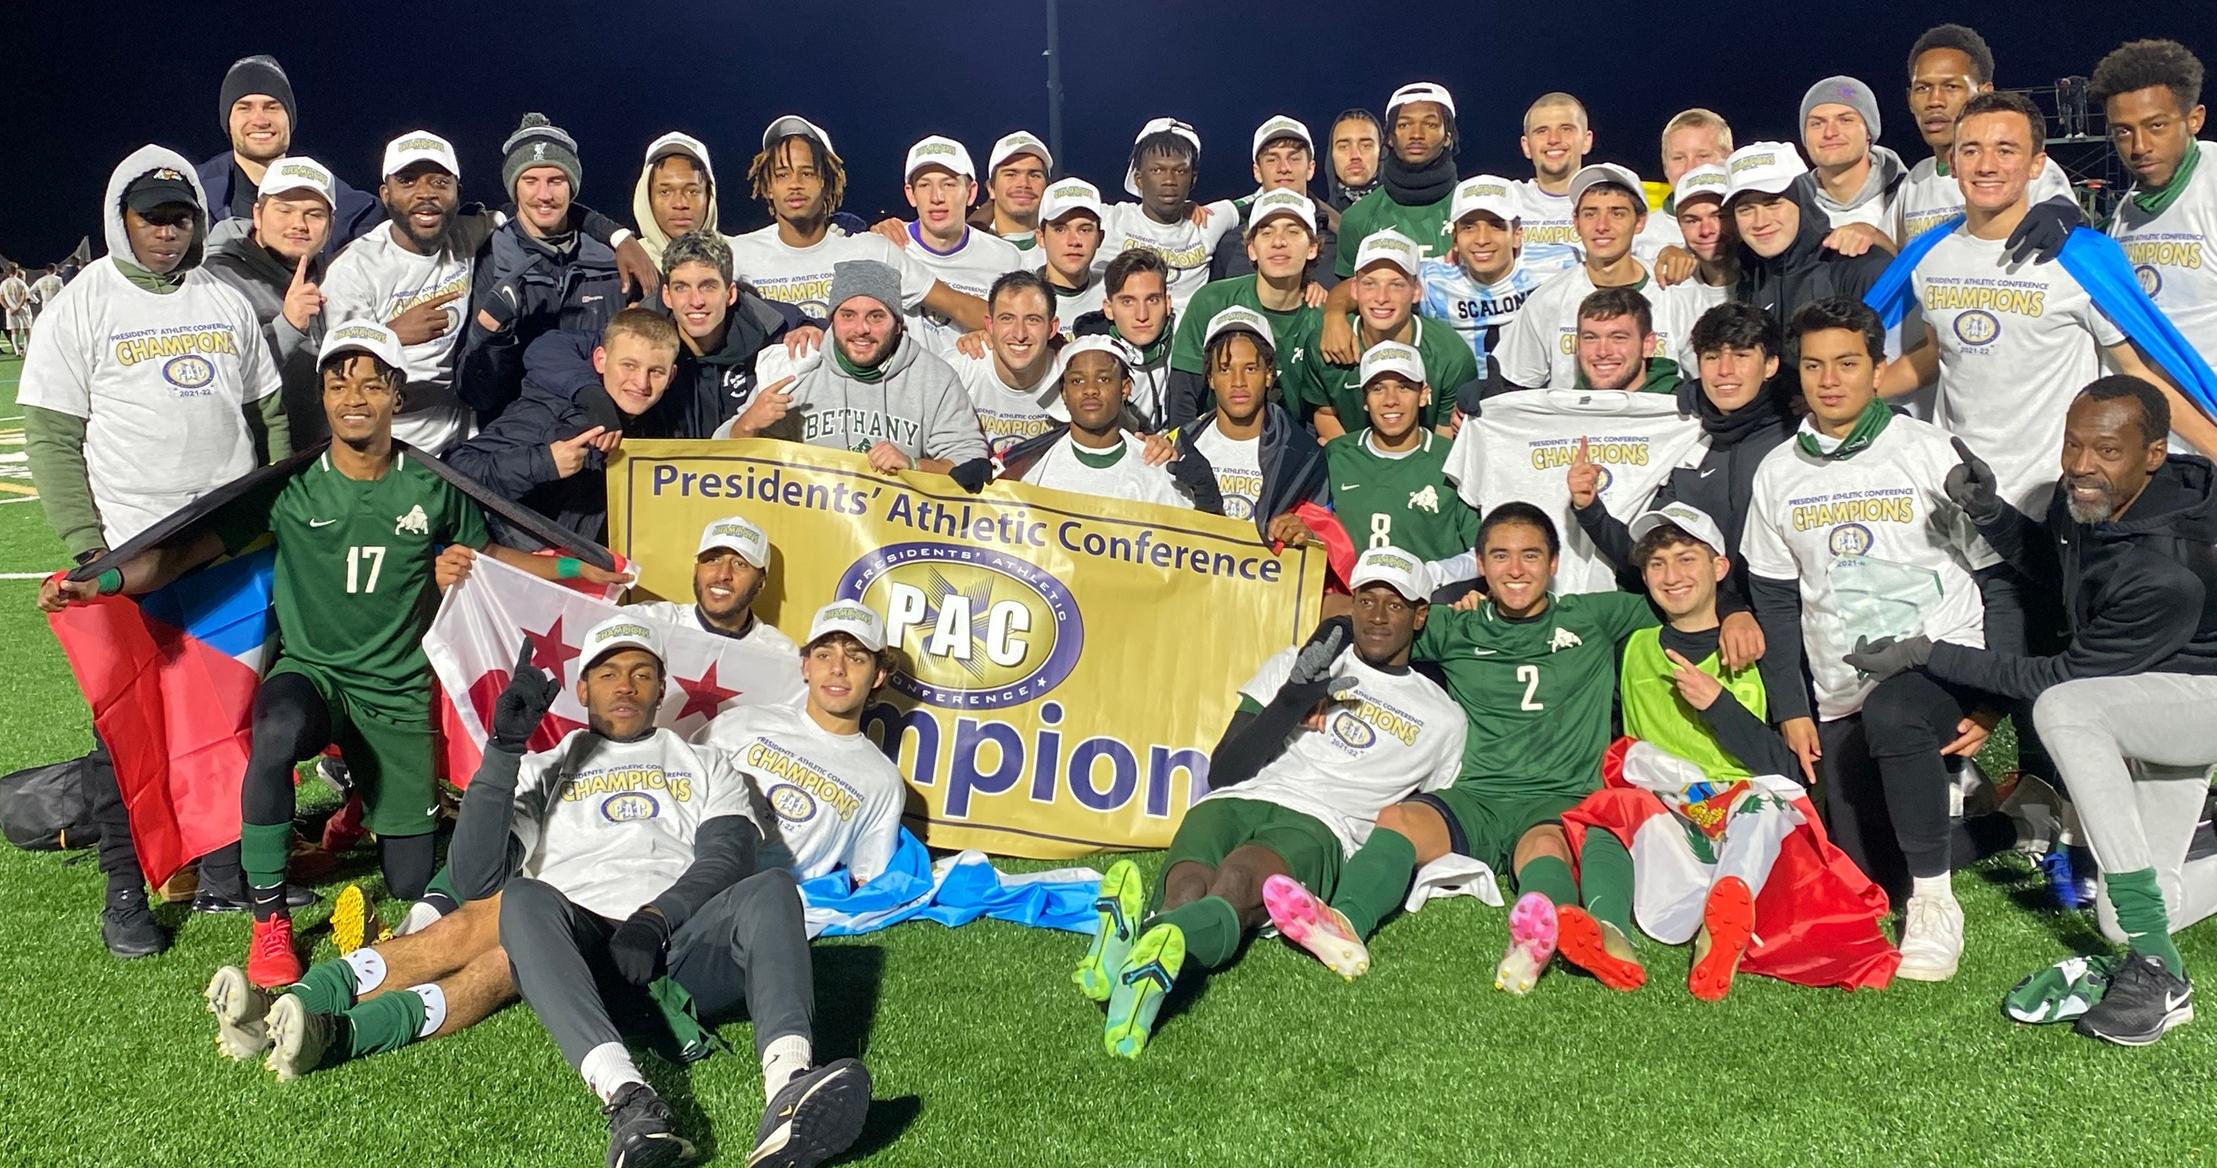 Men's Soccer: Bethany Earns 31st PAC Title